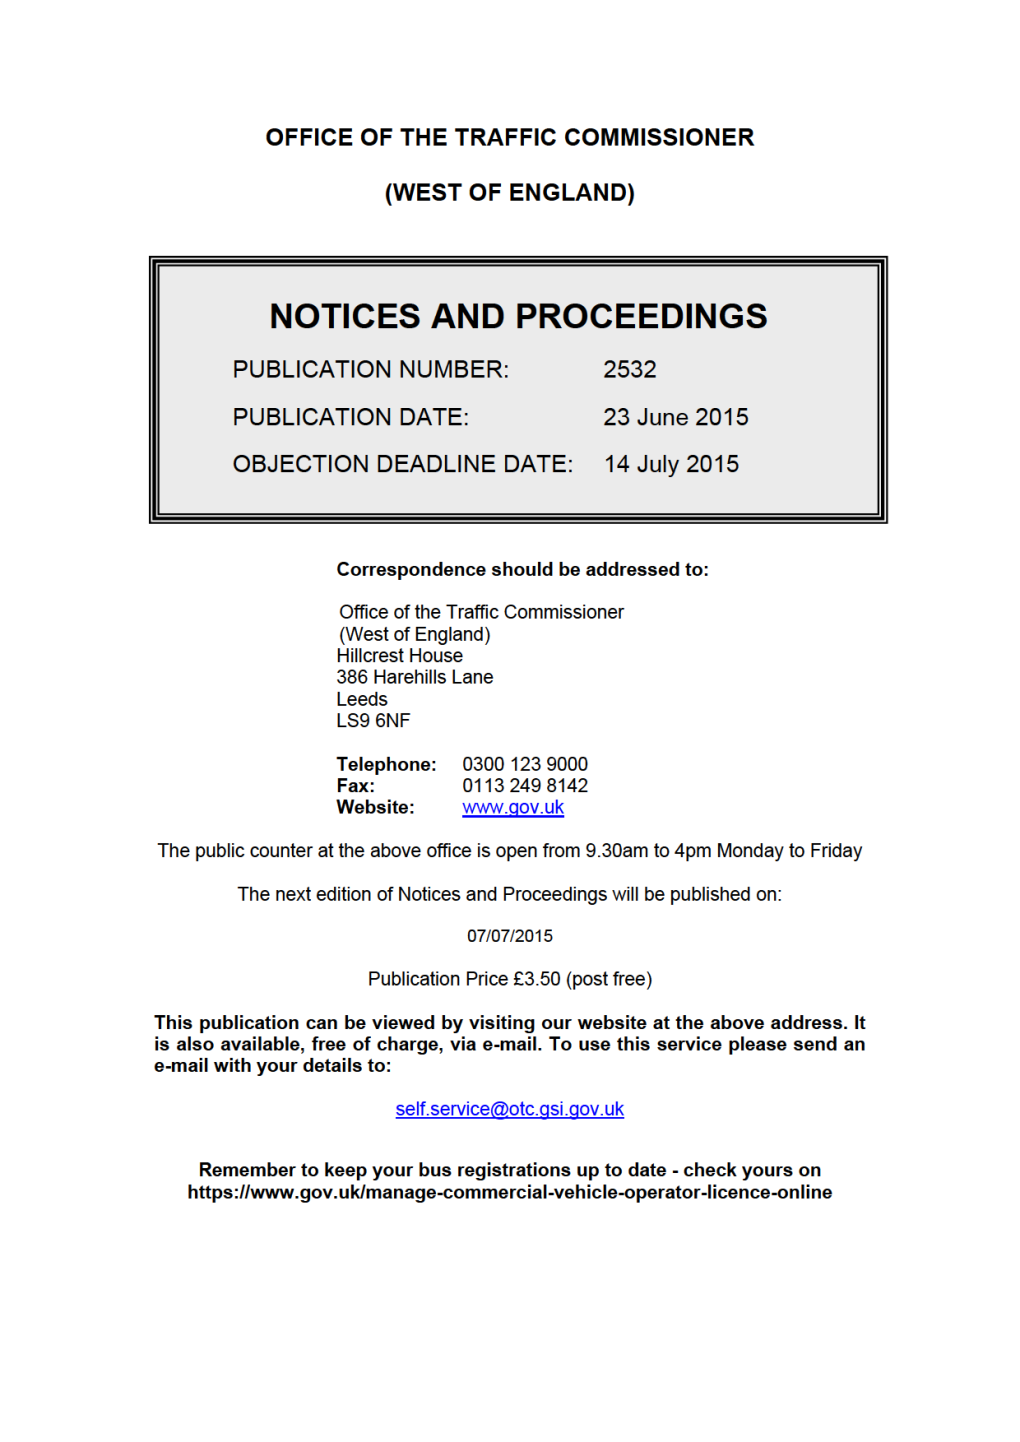 Notices and Proceedings: West of England: 23 June 2015